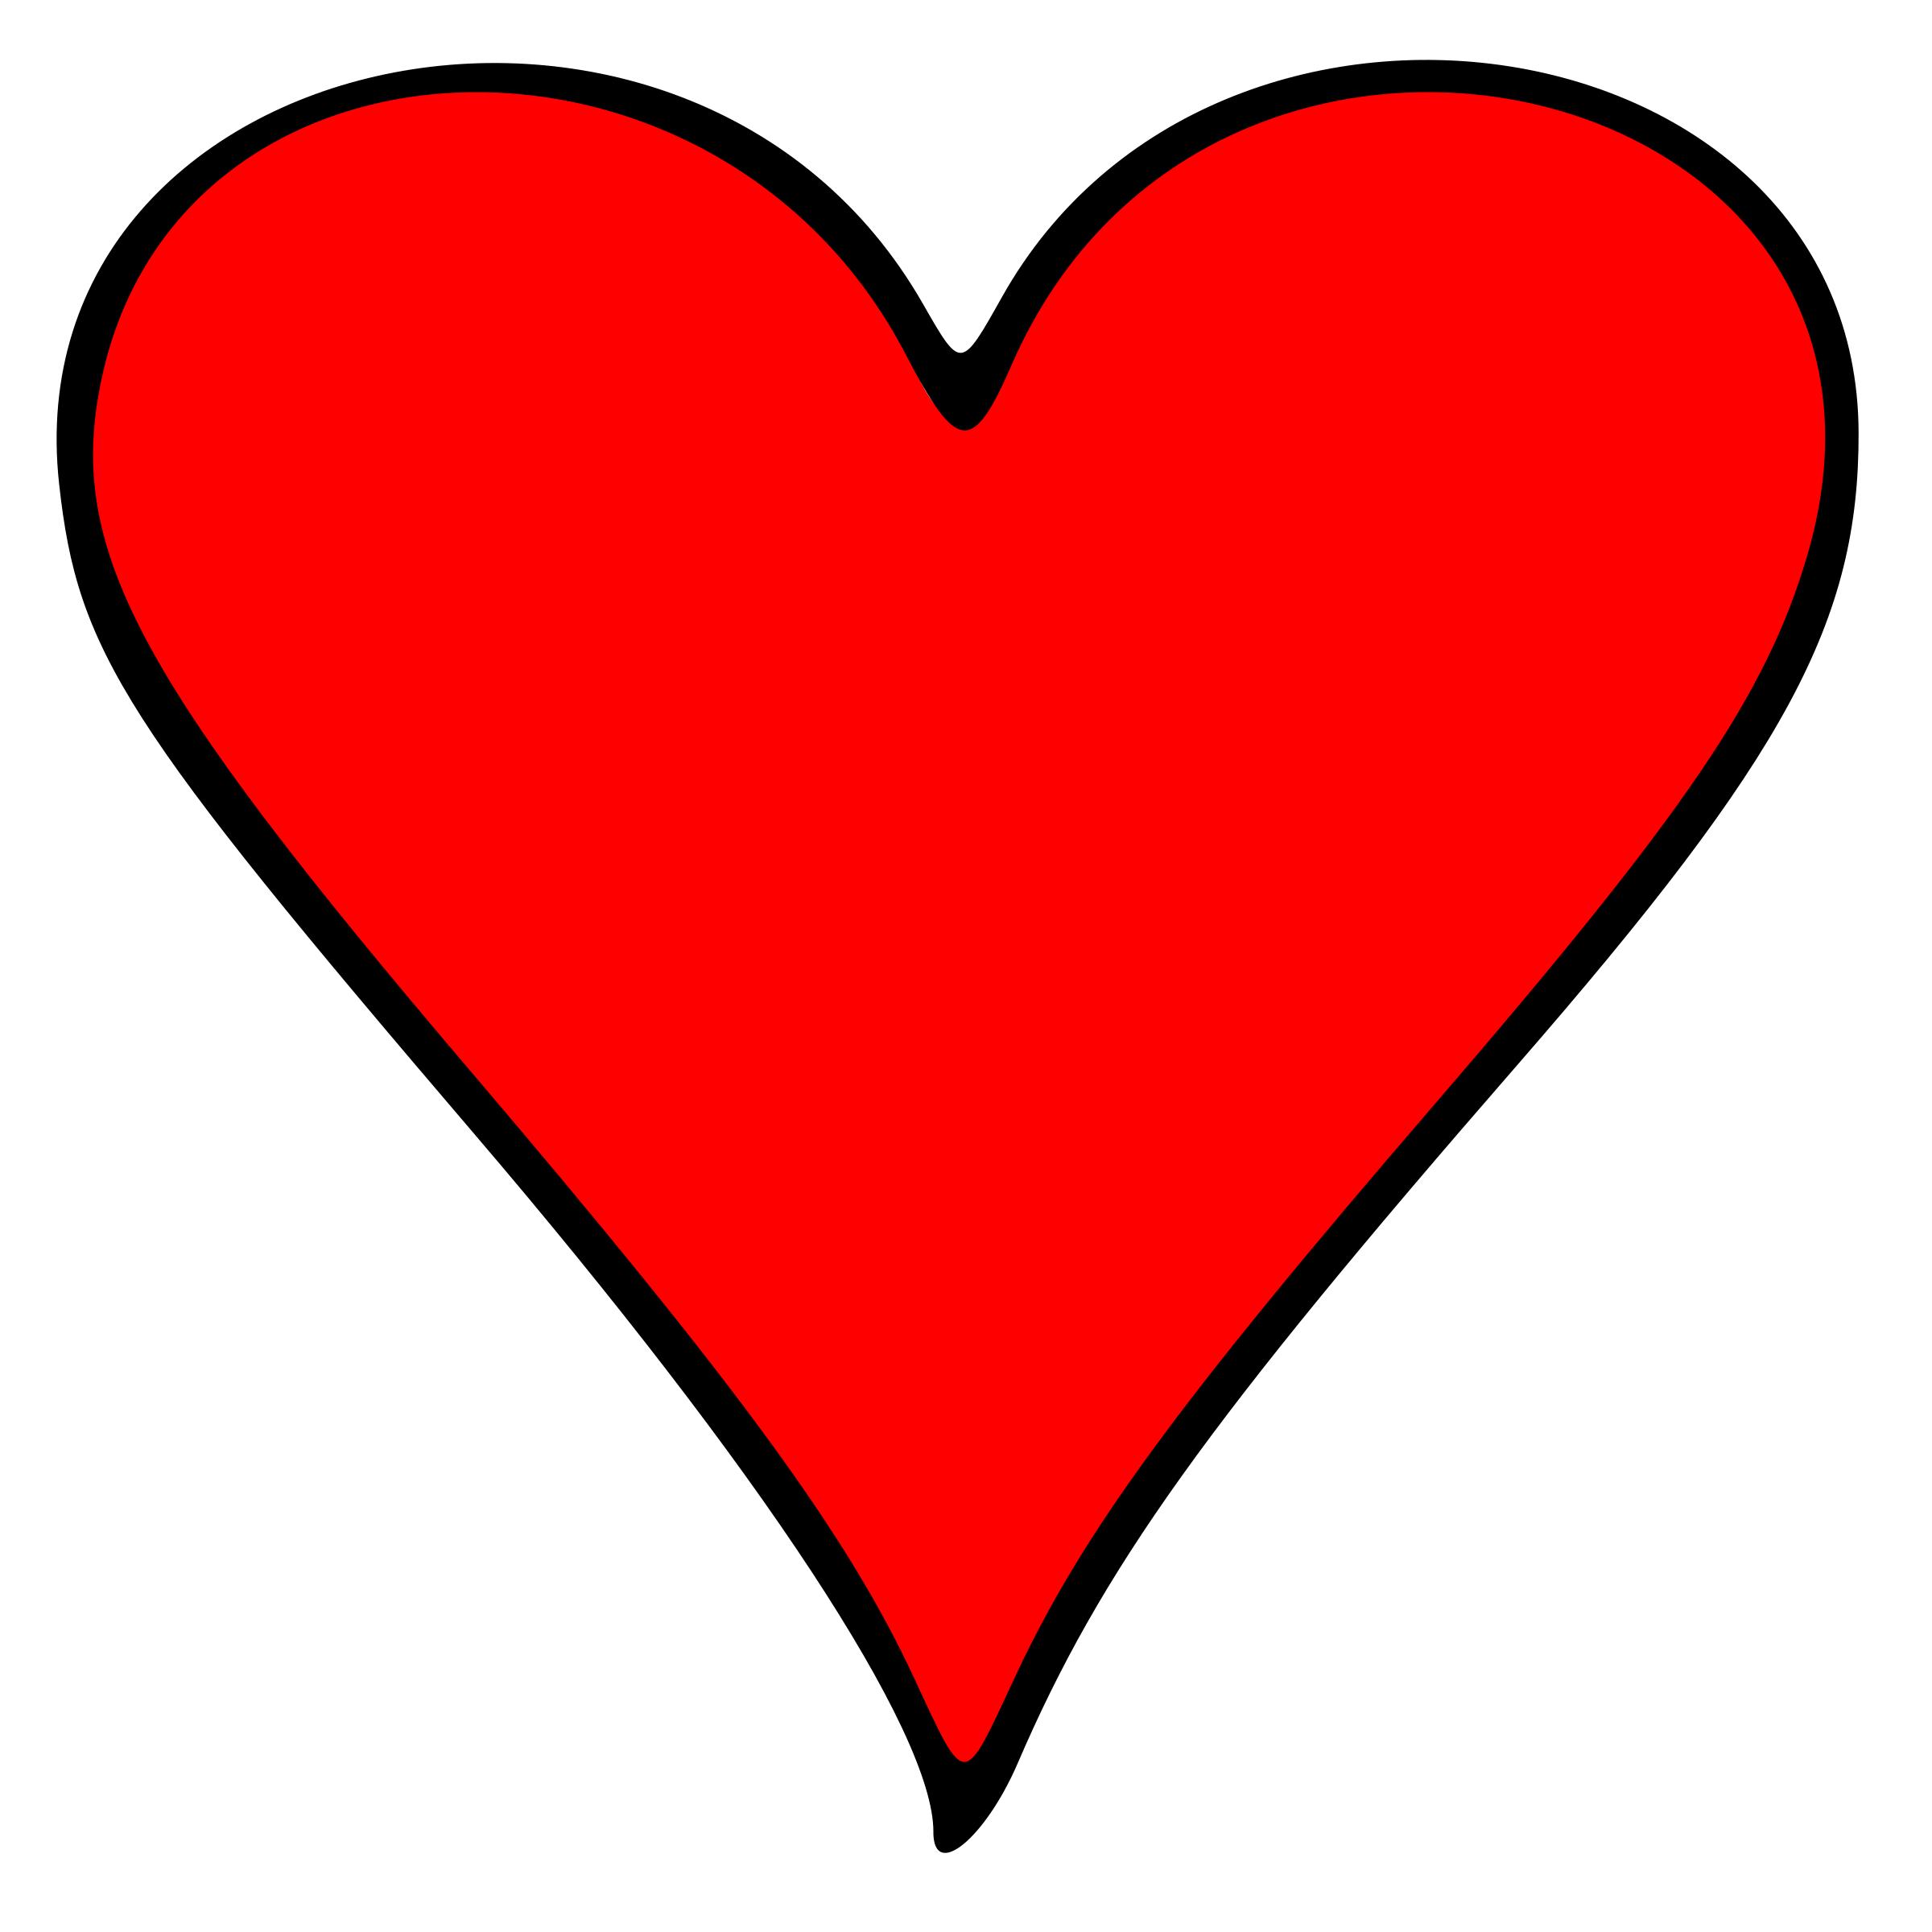 Outlined Heart Playing Card Symbol png